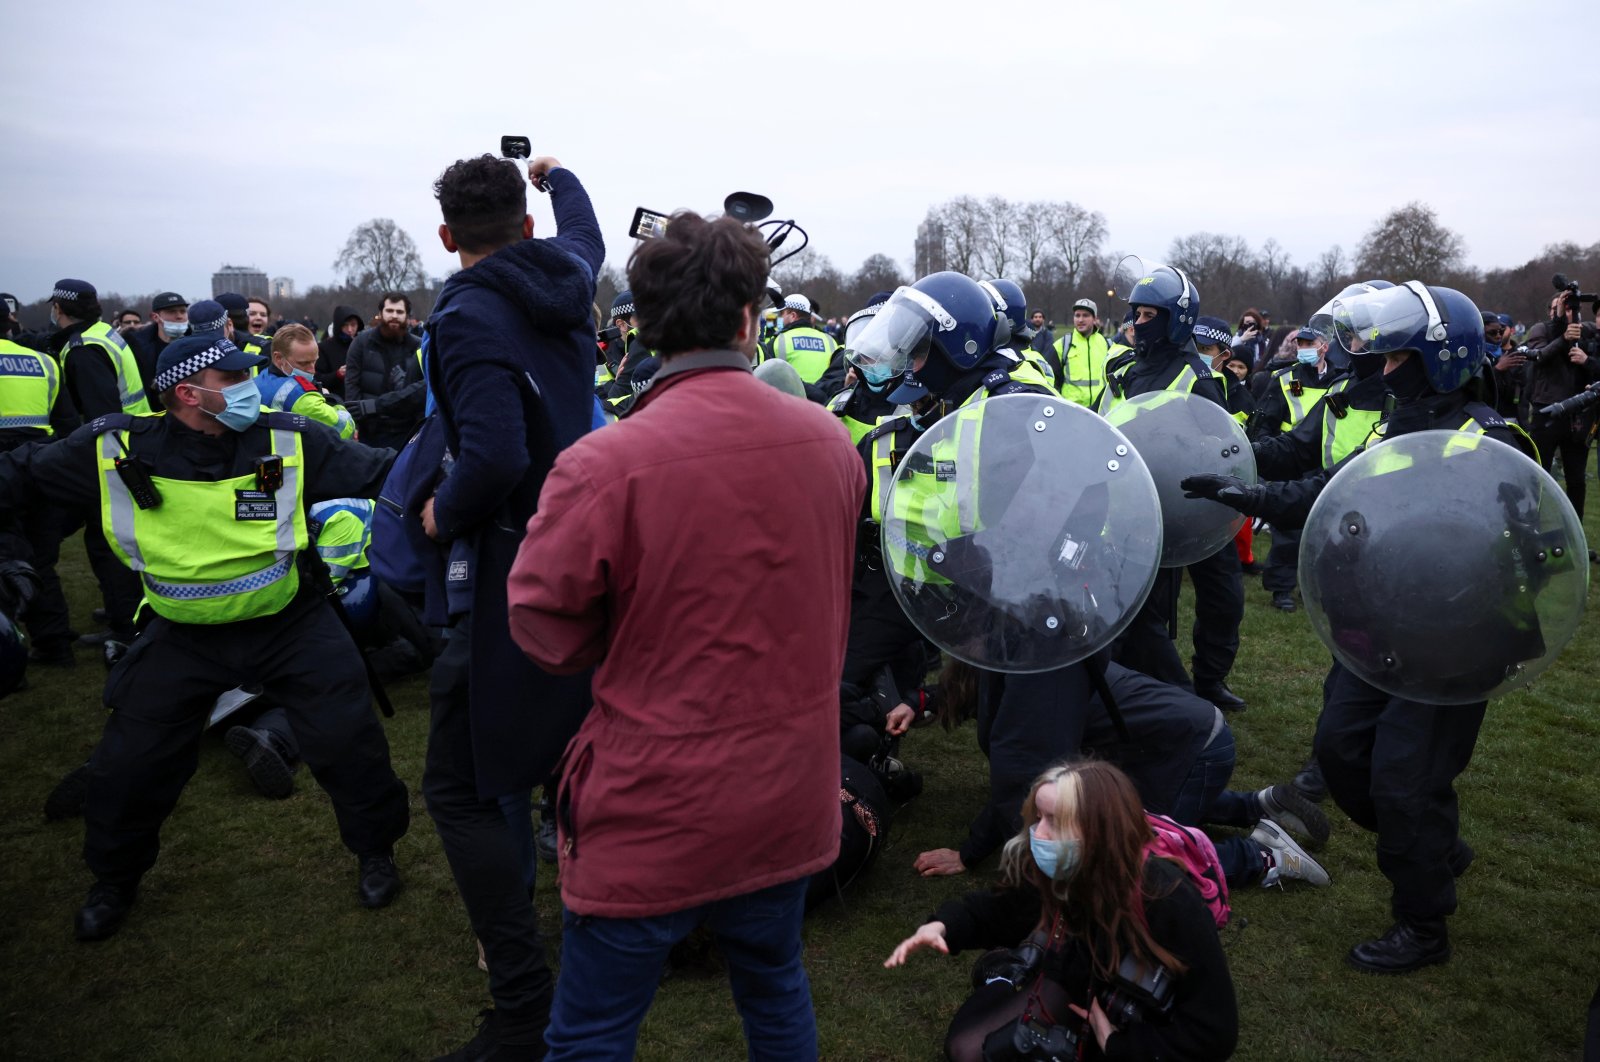 Members of the media stand next to police officers detaining people during a protest against the lockdown, amid the spread of the coronavirus disease, in London, Britain, March 20, 2021. (Reuters Photo)